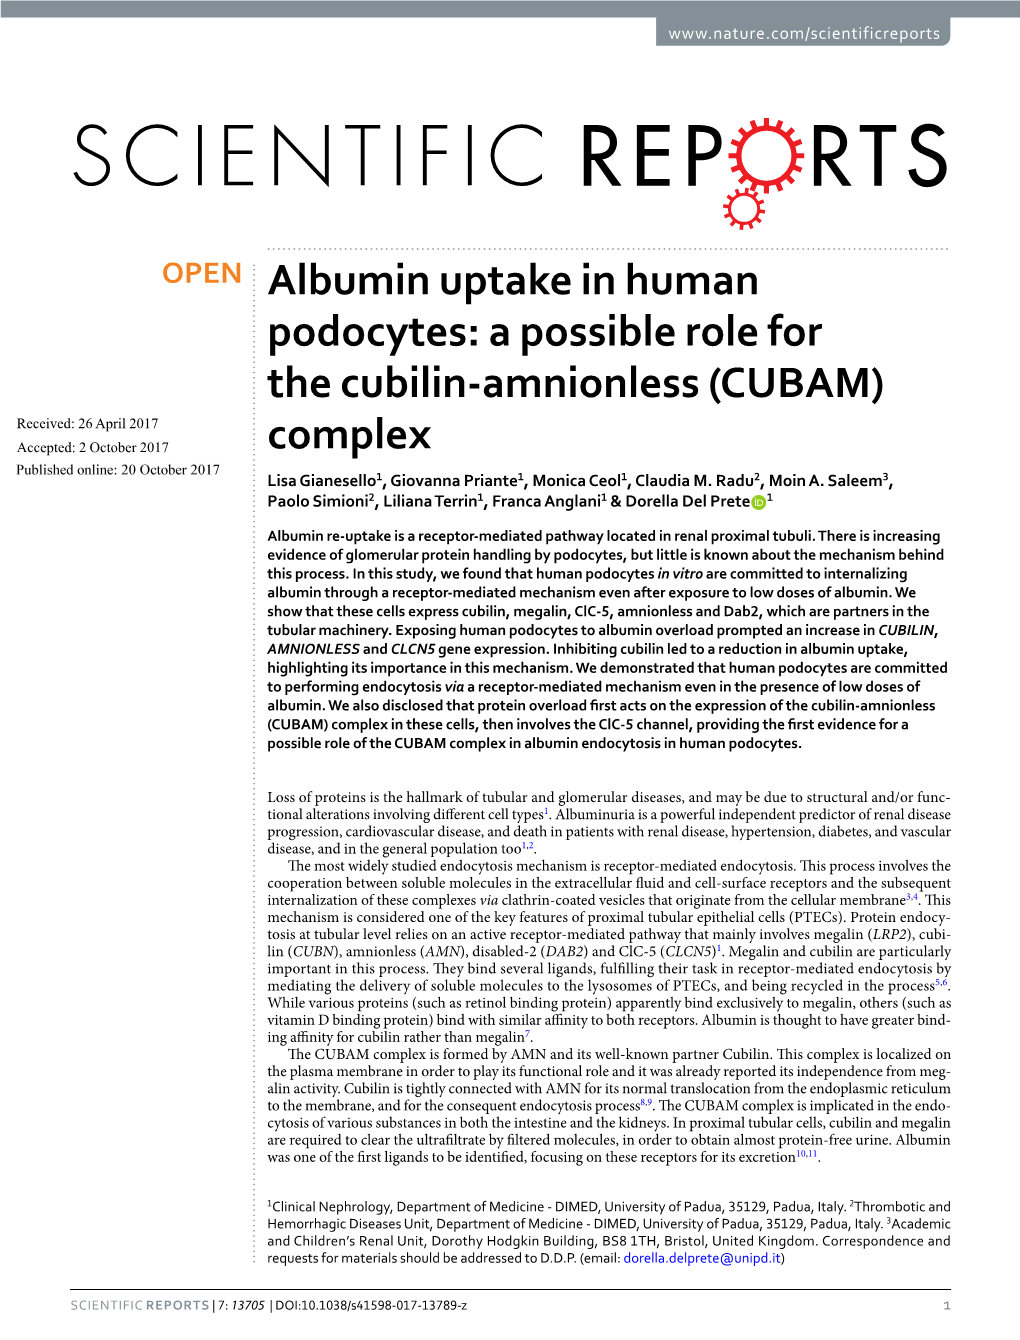 Albumin Uptake in Human Podocytes: a Possible Role for the Cubilin